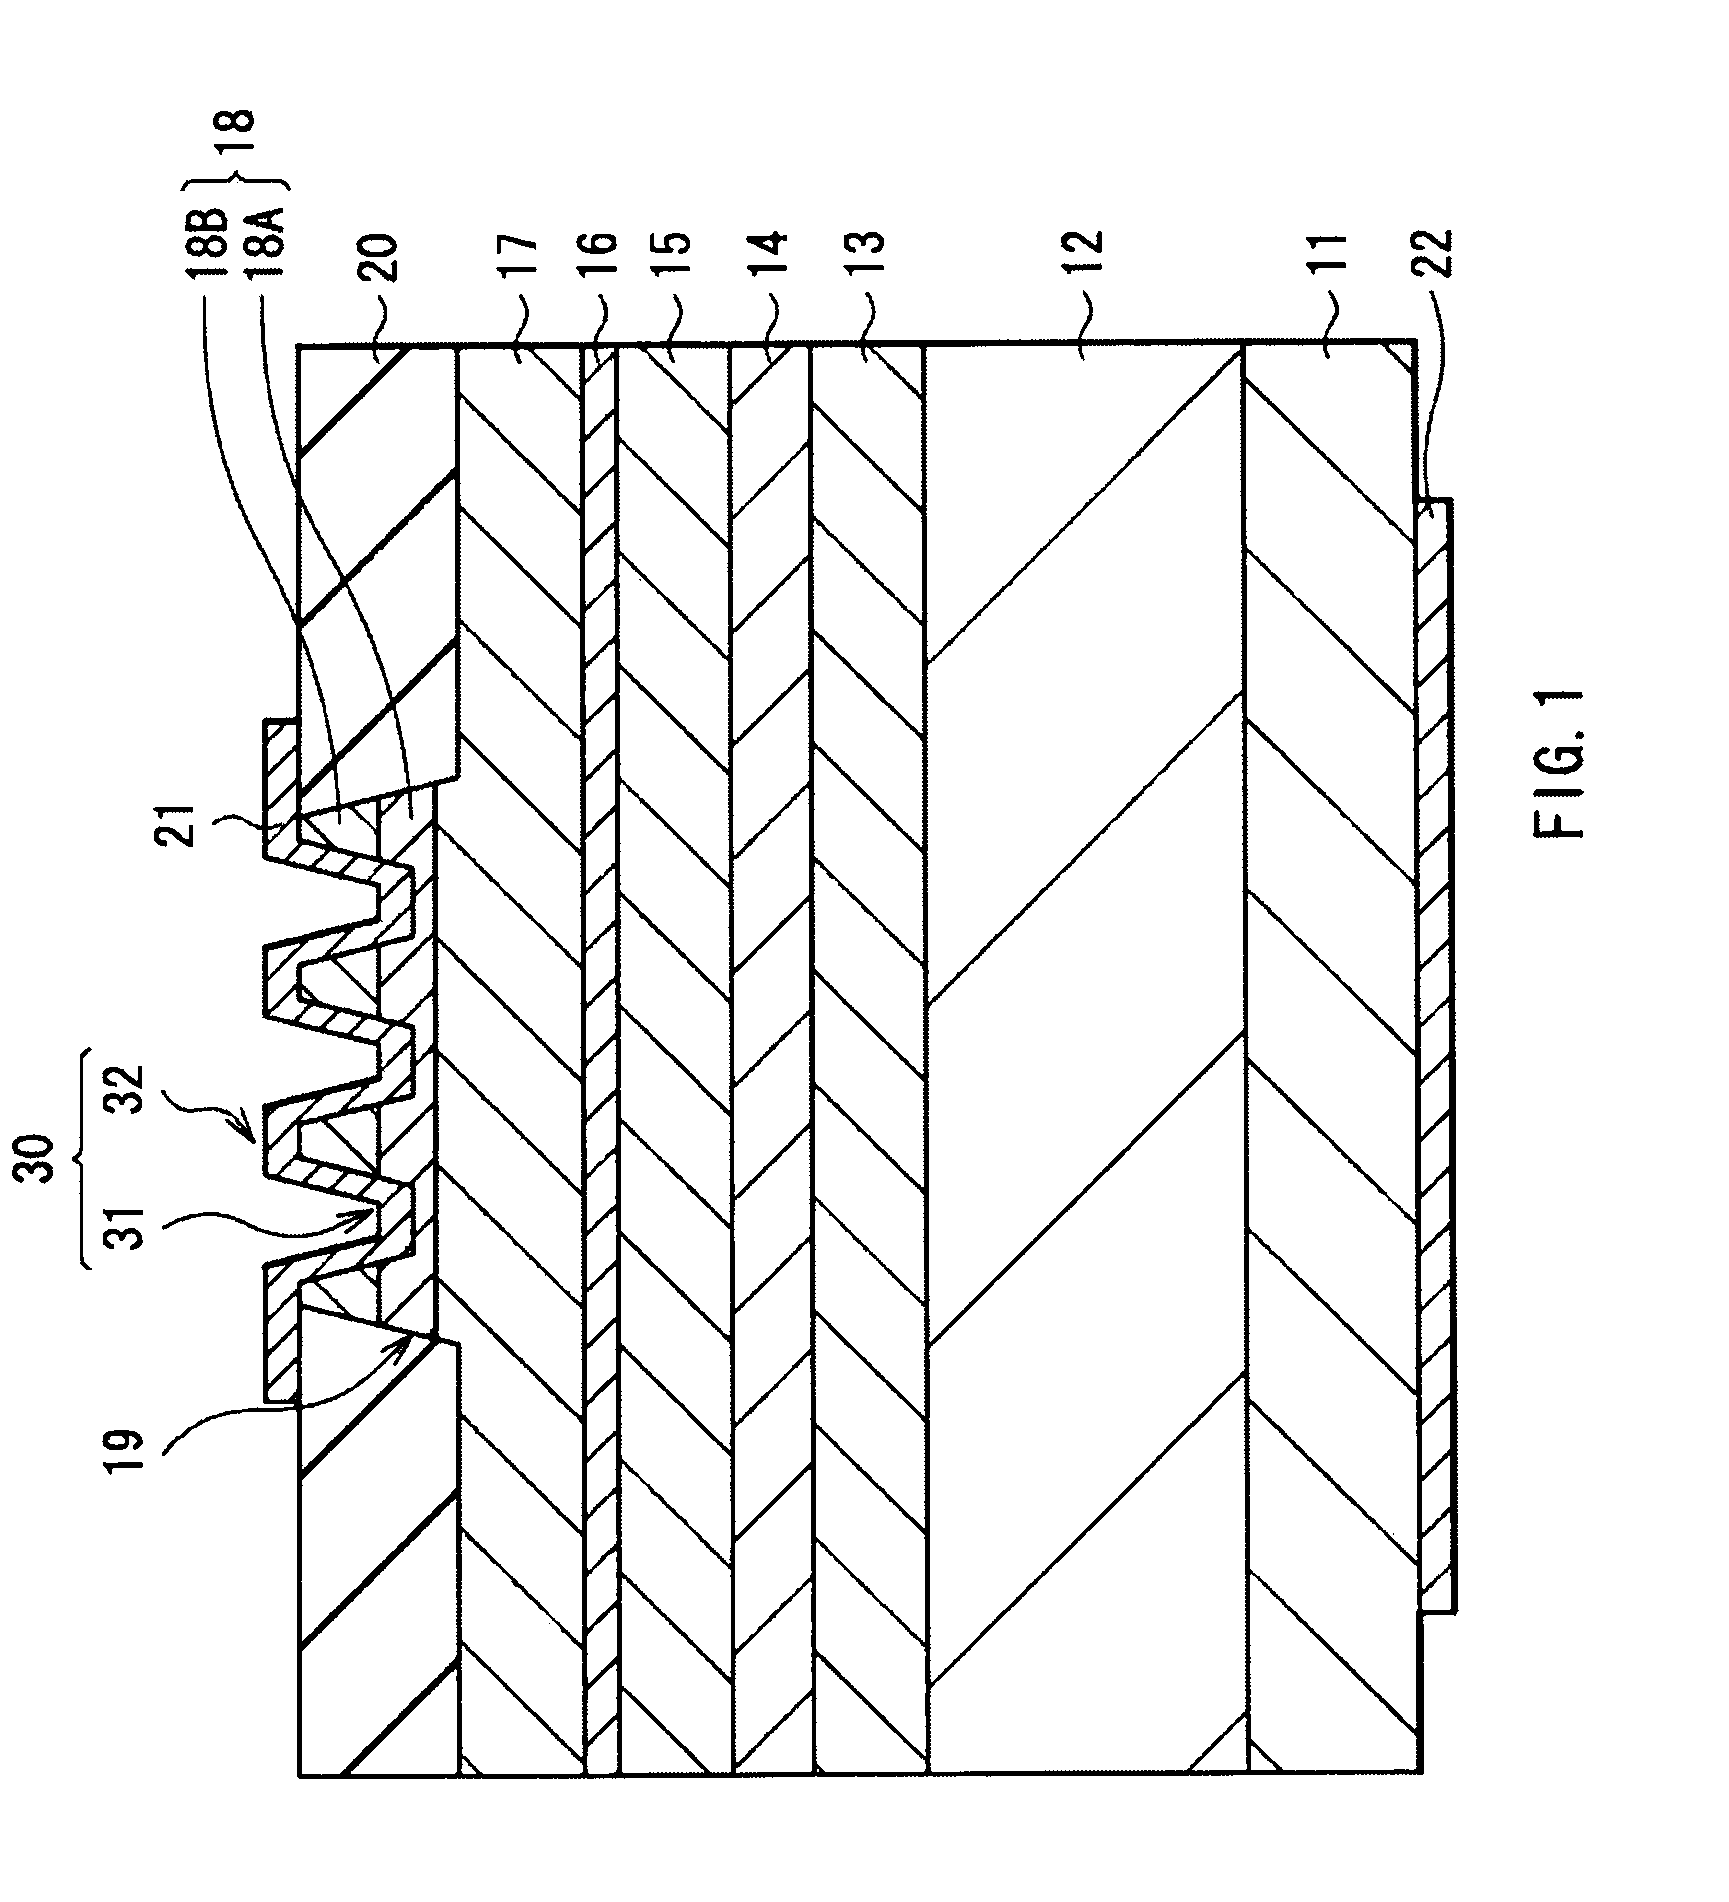 Laser diode device